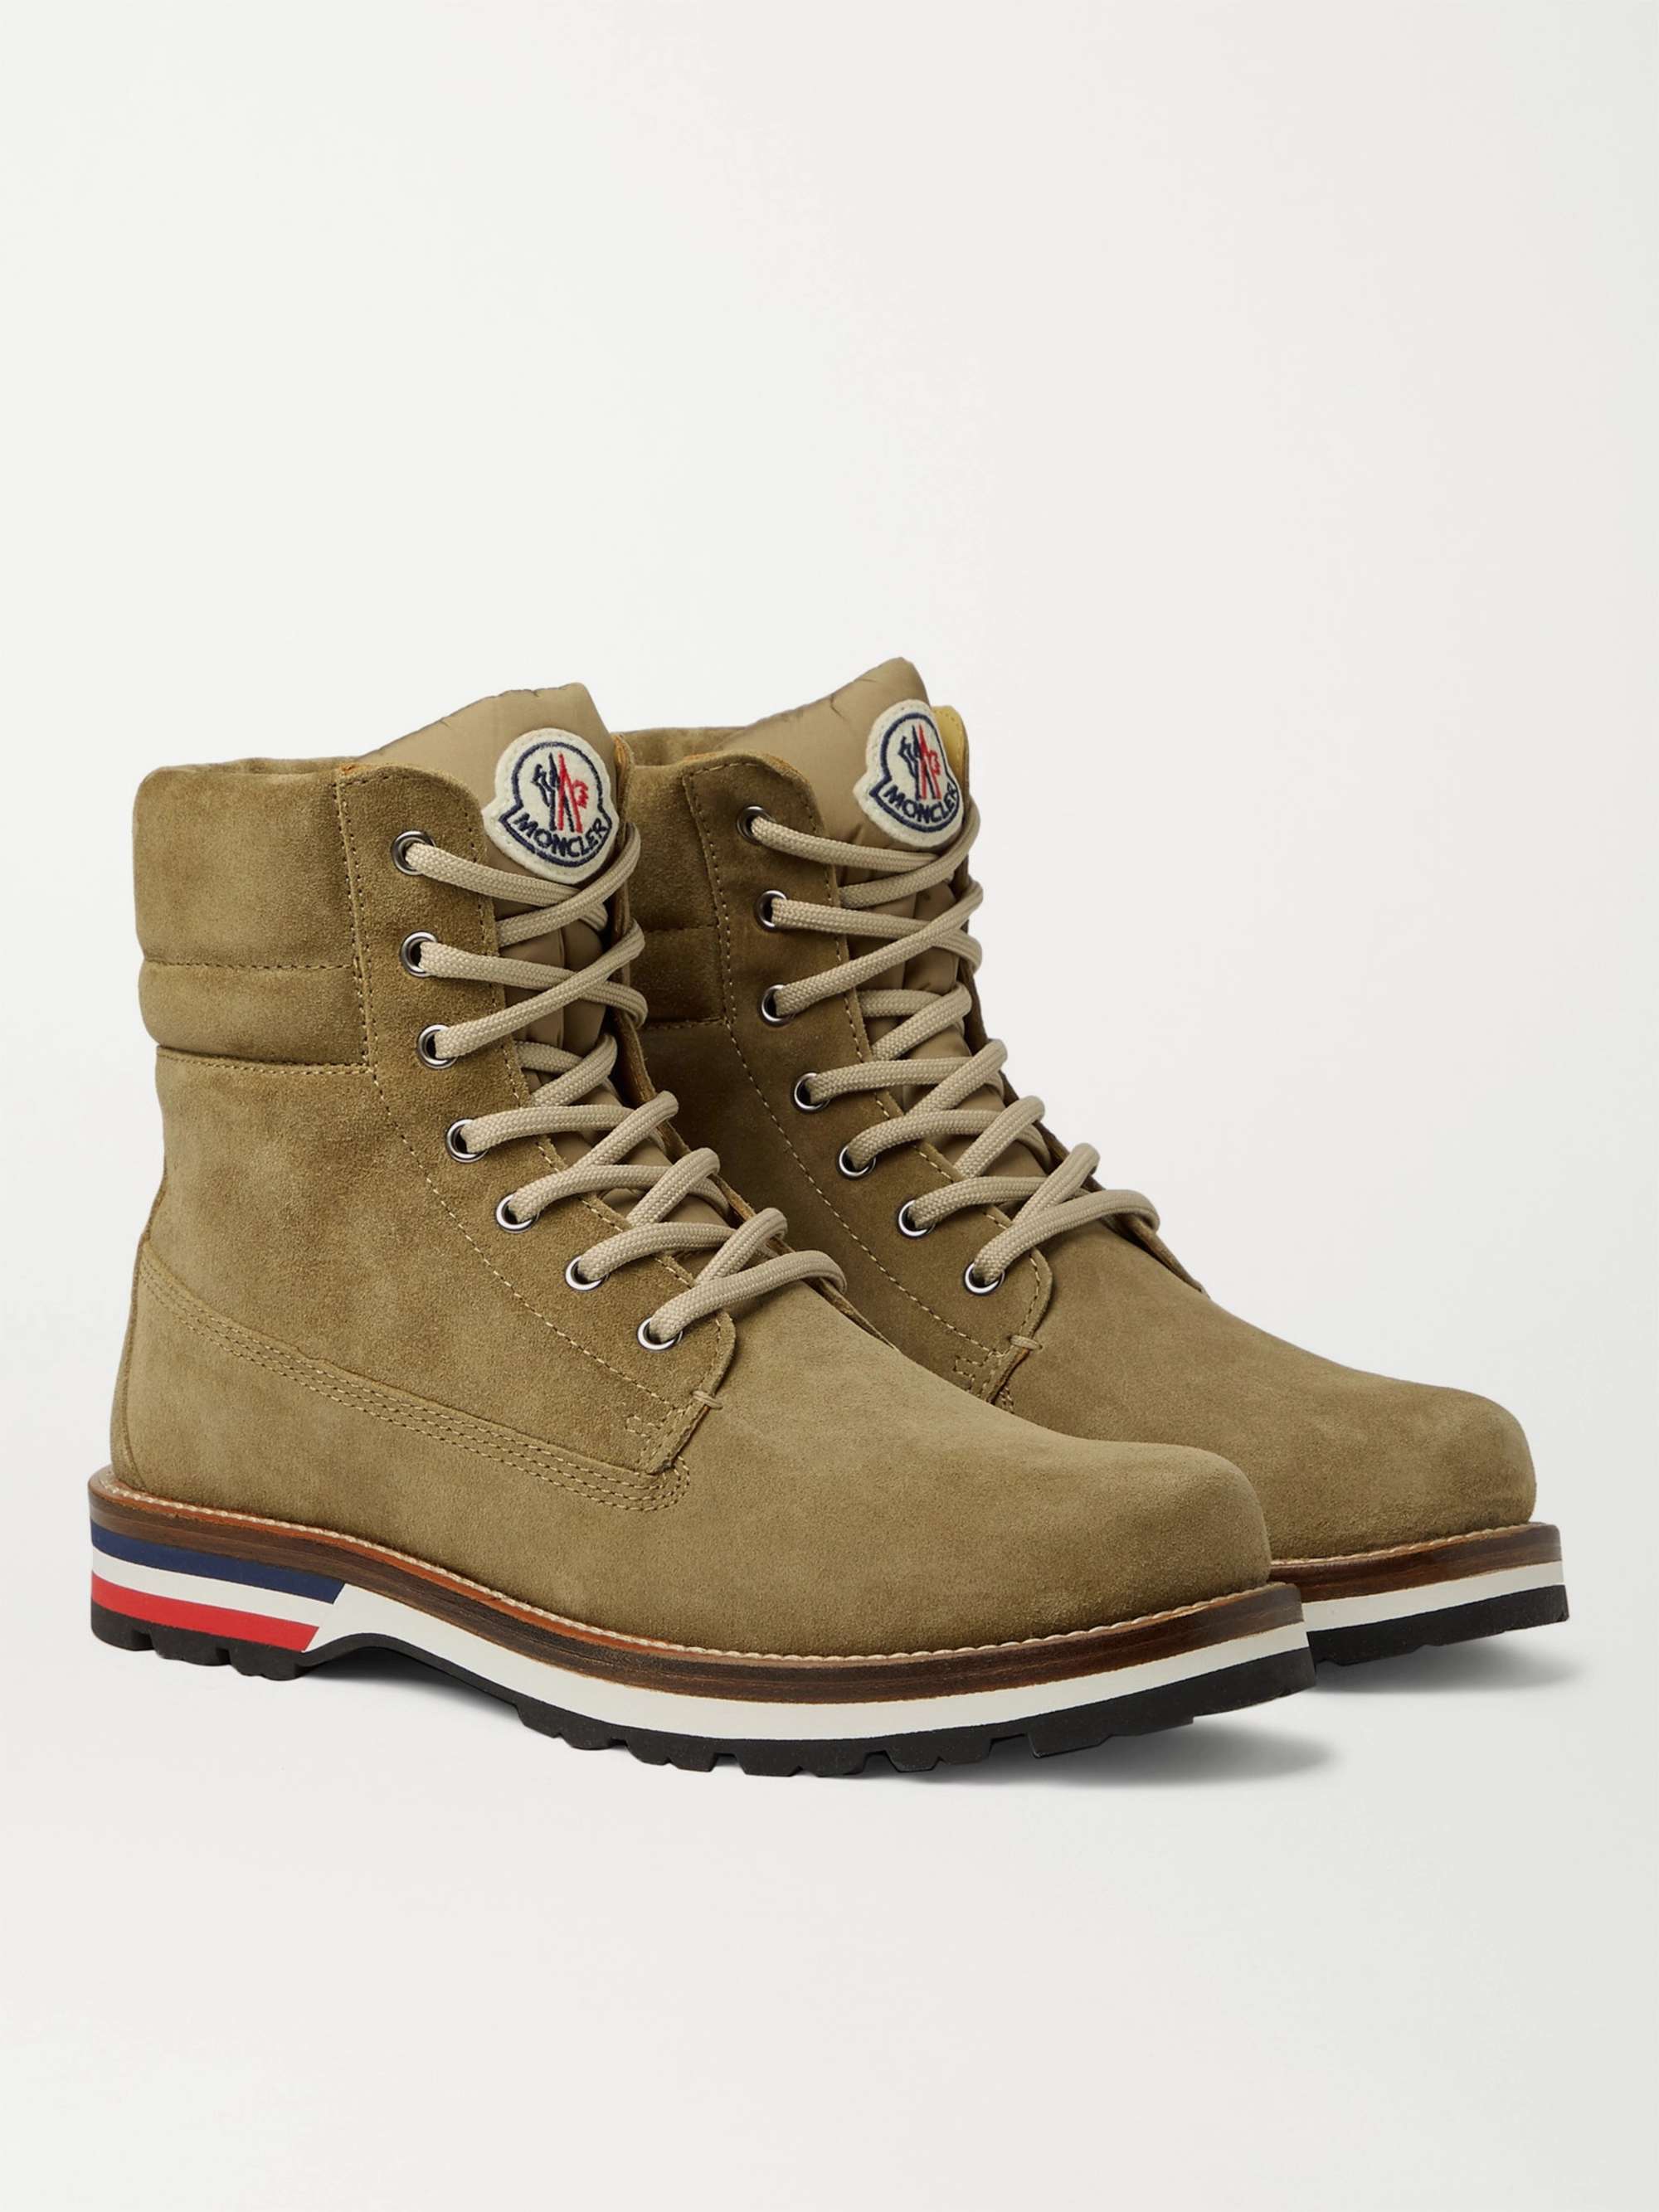 MONCLER Vancouver Striped Suede Hiking Boots | MR PORTER